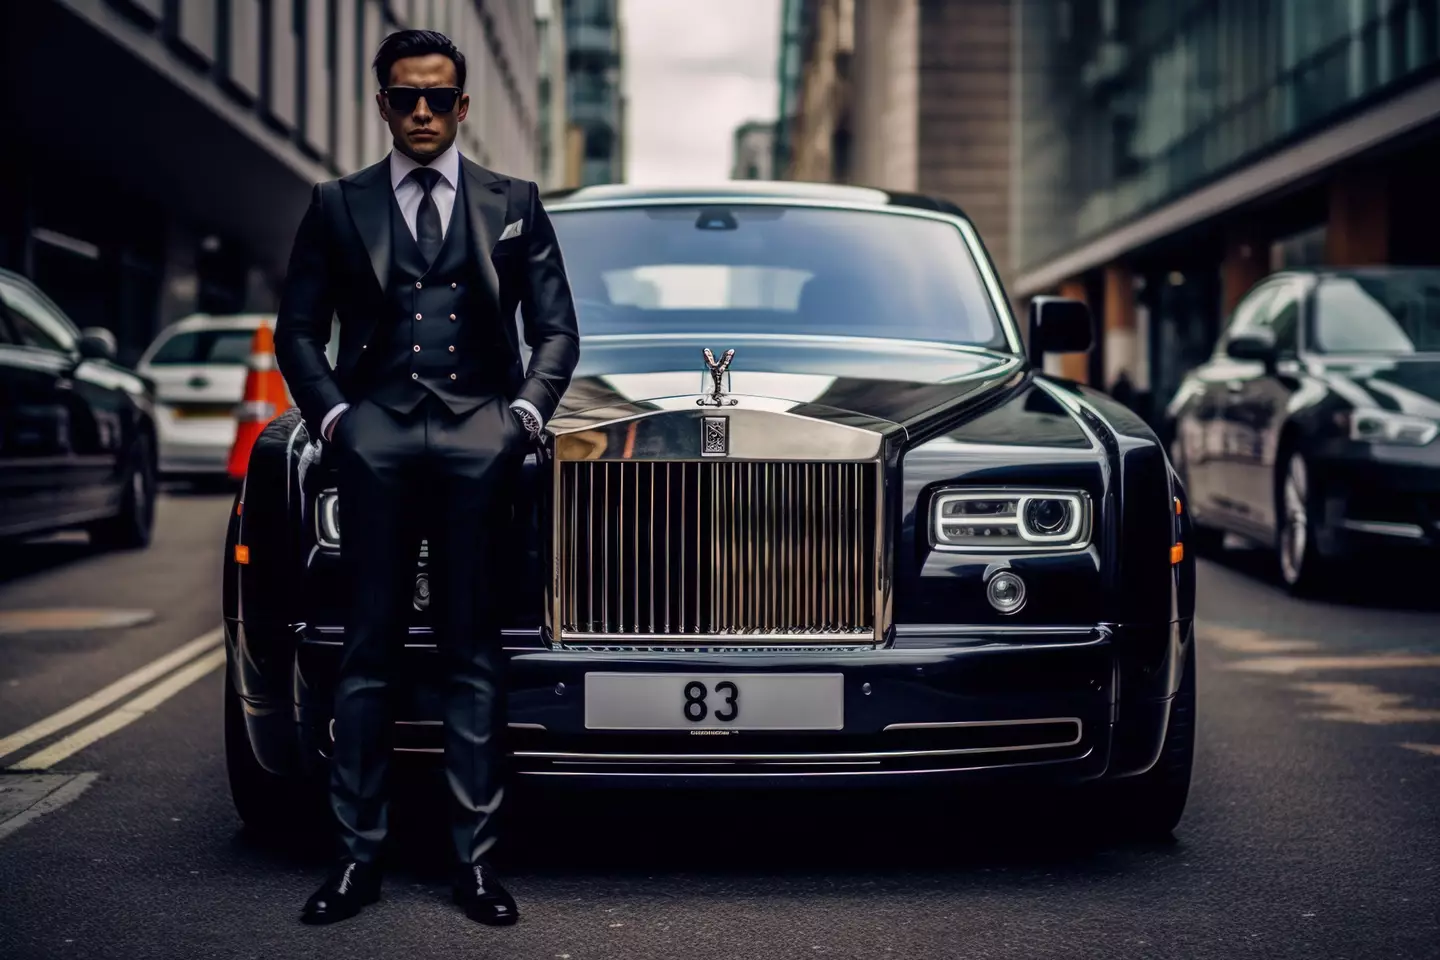 Mr Rolls Royce looks like some guy who tries to convince you his wealth doesn't come from his parents.